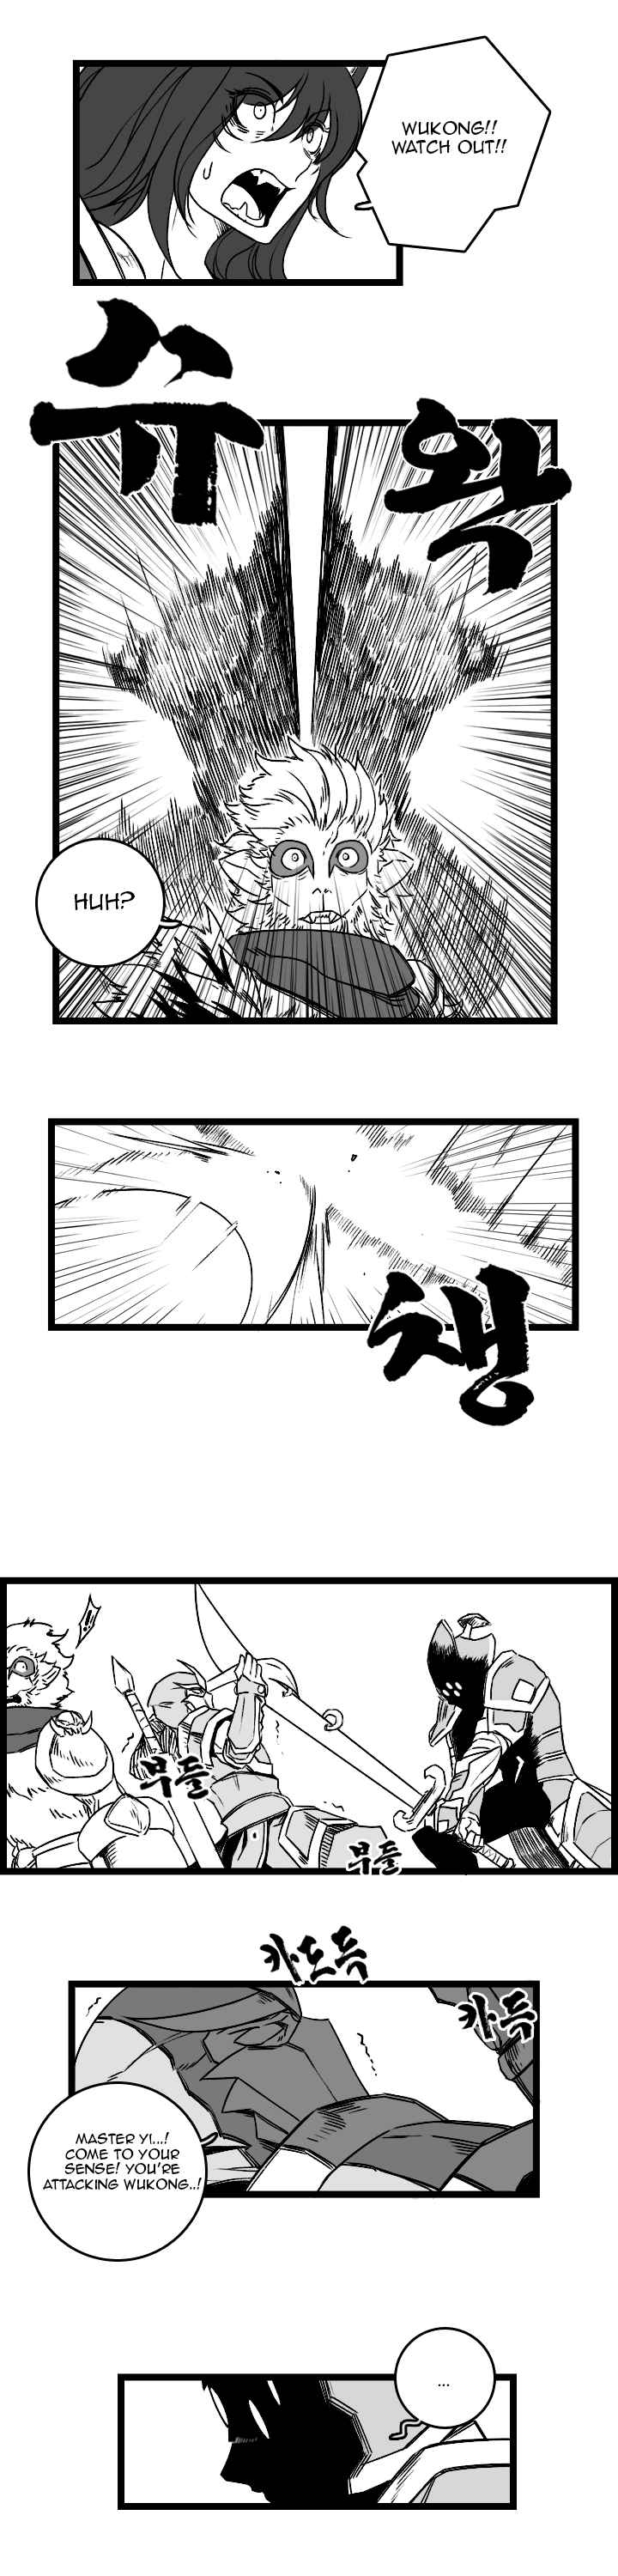 League of Legends Syndra & Zed's Everyday Life (Doujinshi) Vol. 3 Ch. 39